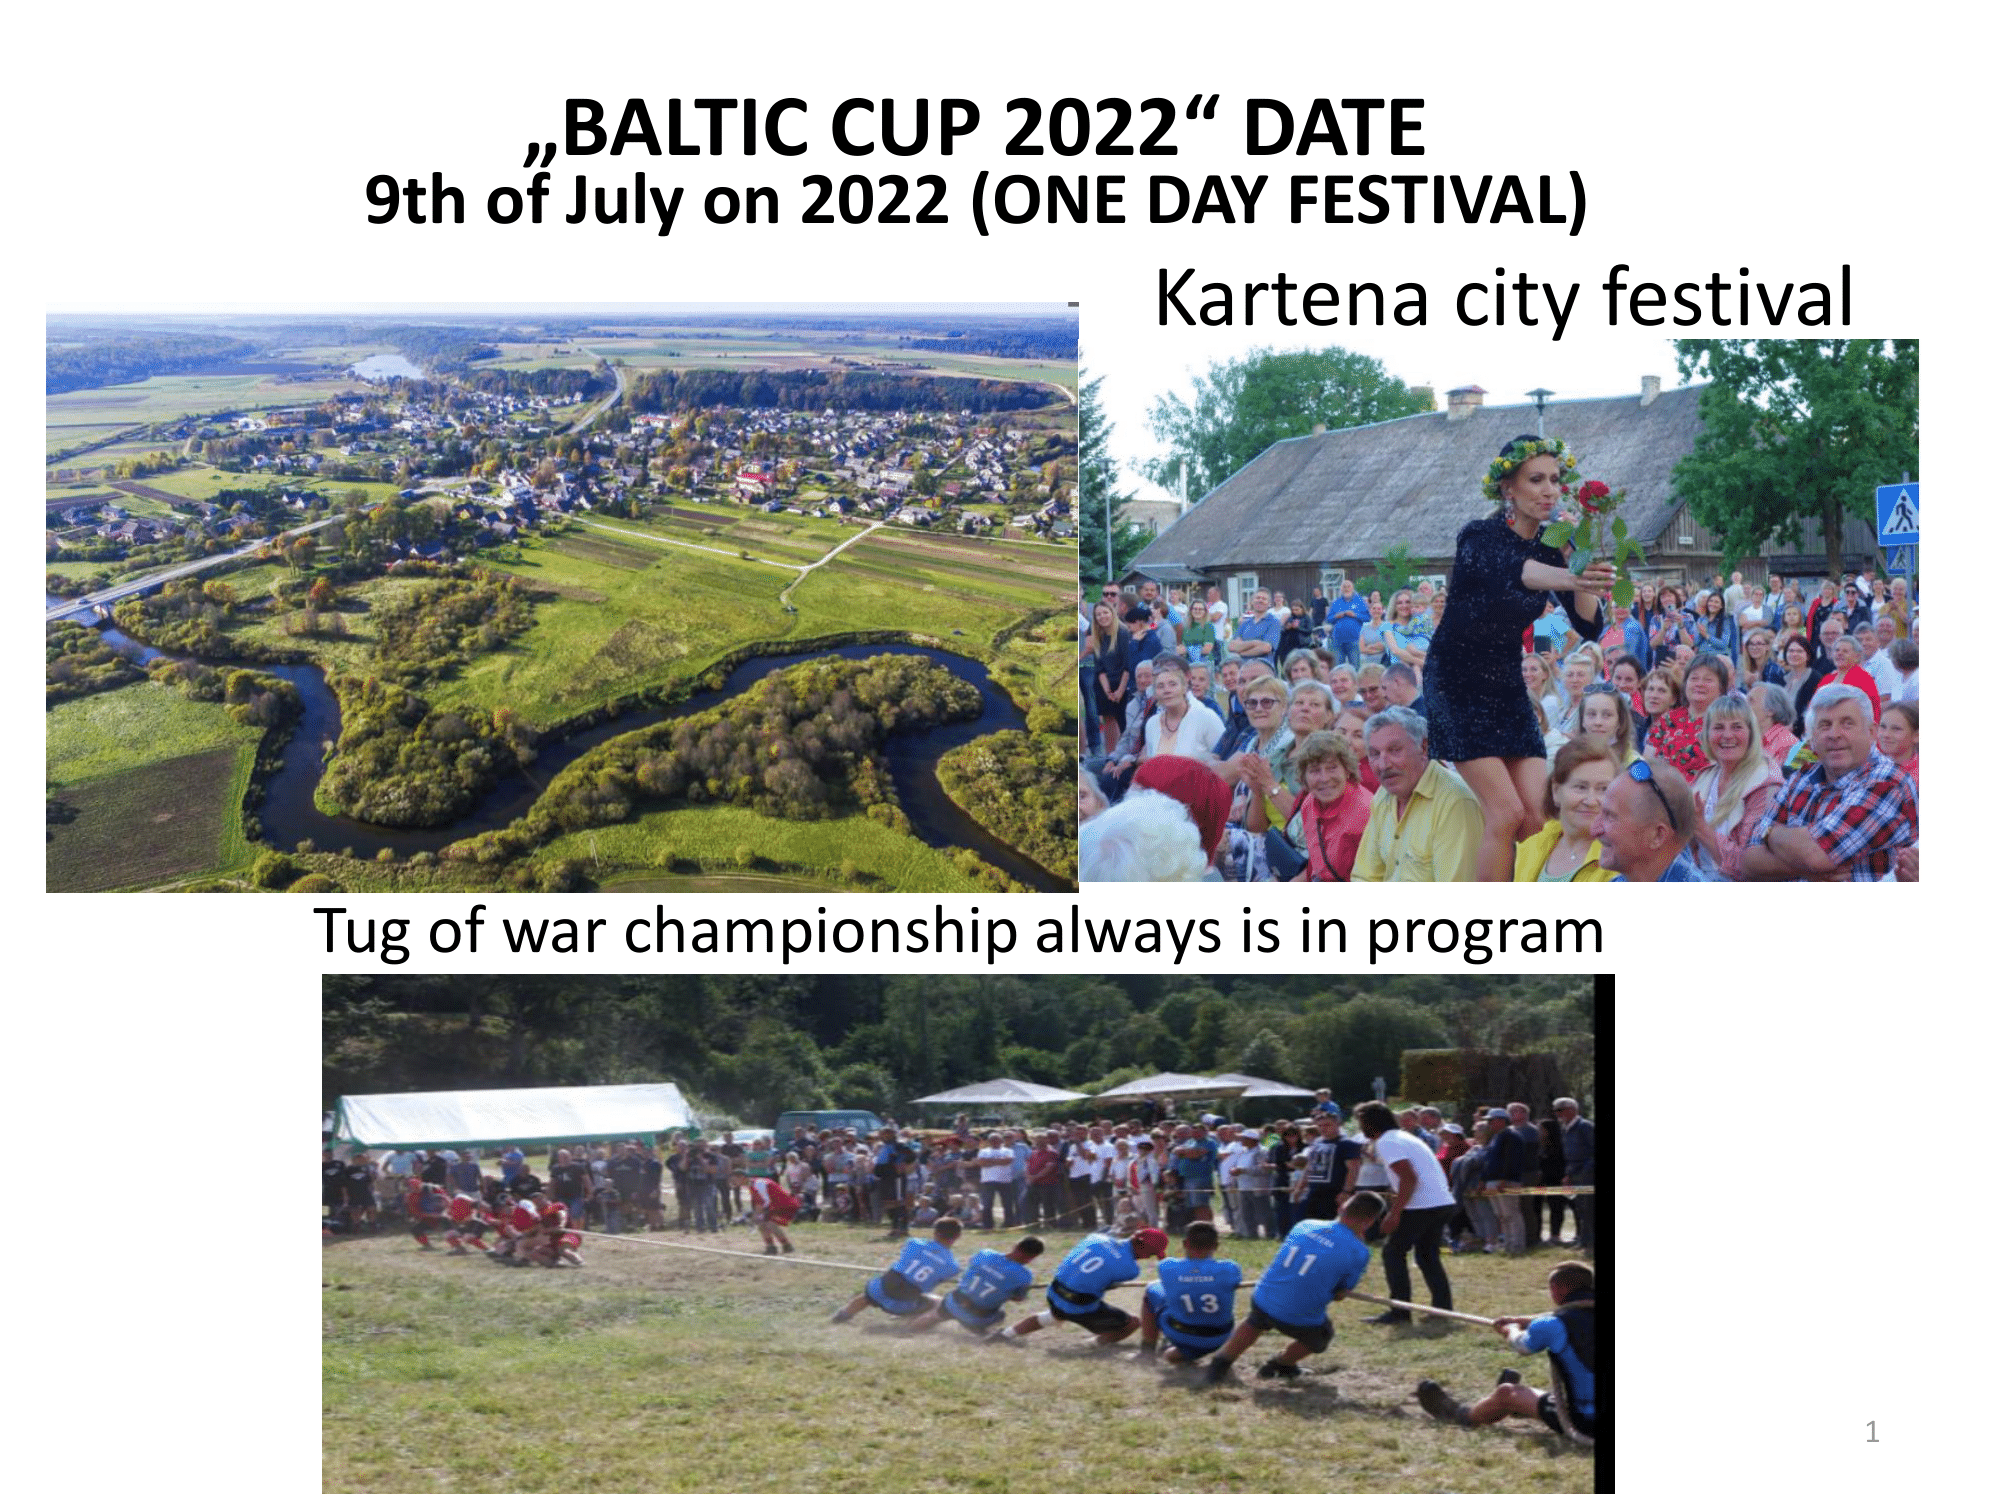 „BALTIC CUP 2022“ DATE 9th of July on 2022 (ONE DAY FESTIVAL)